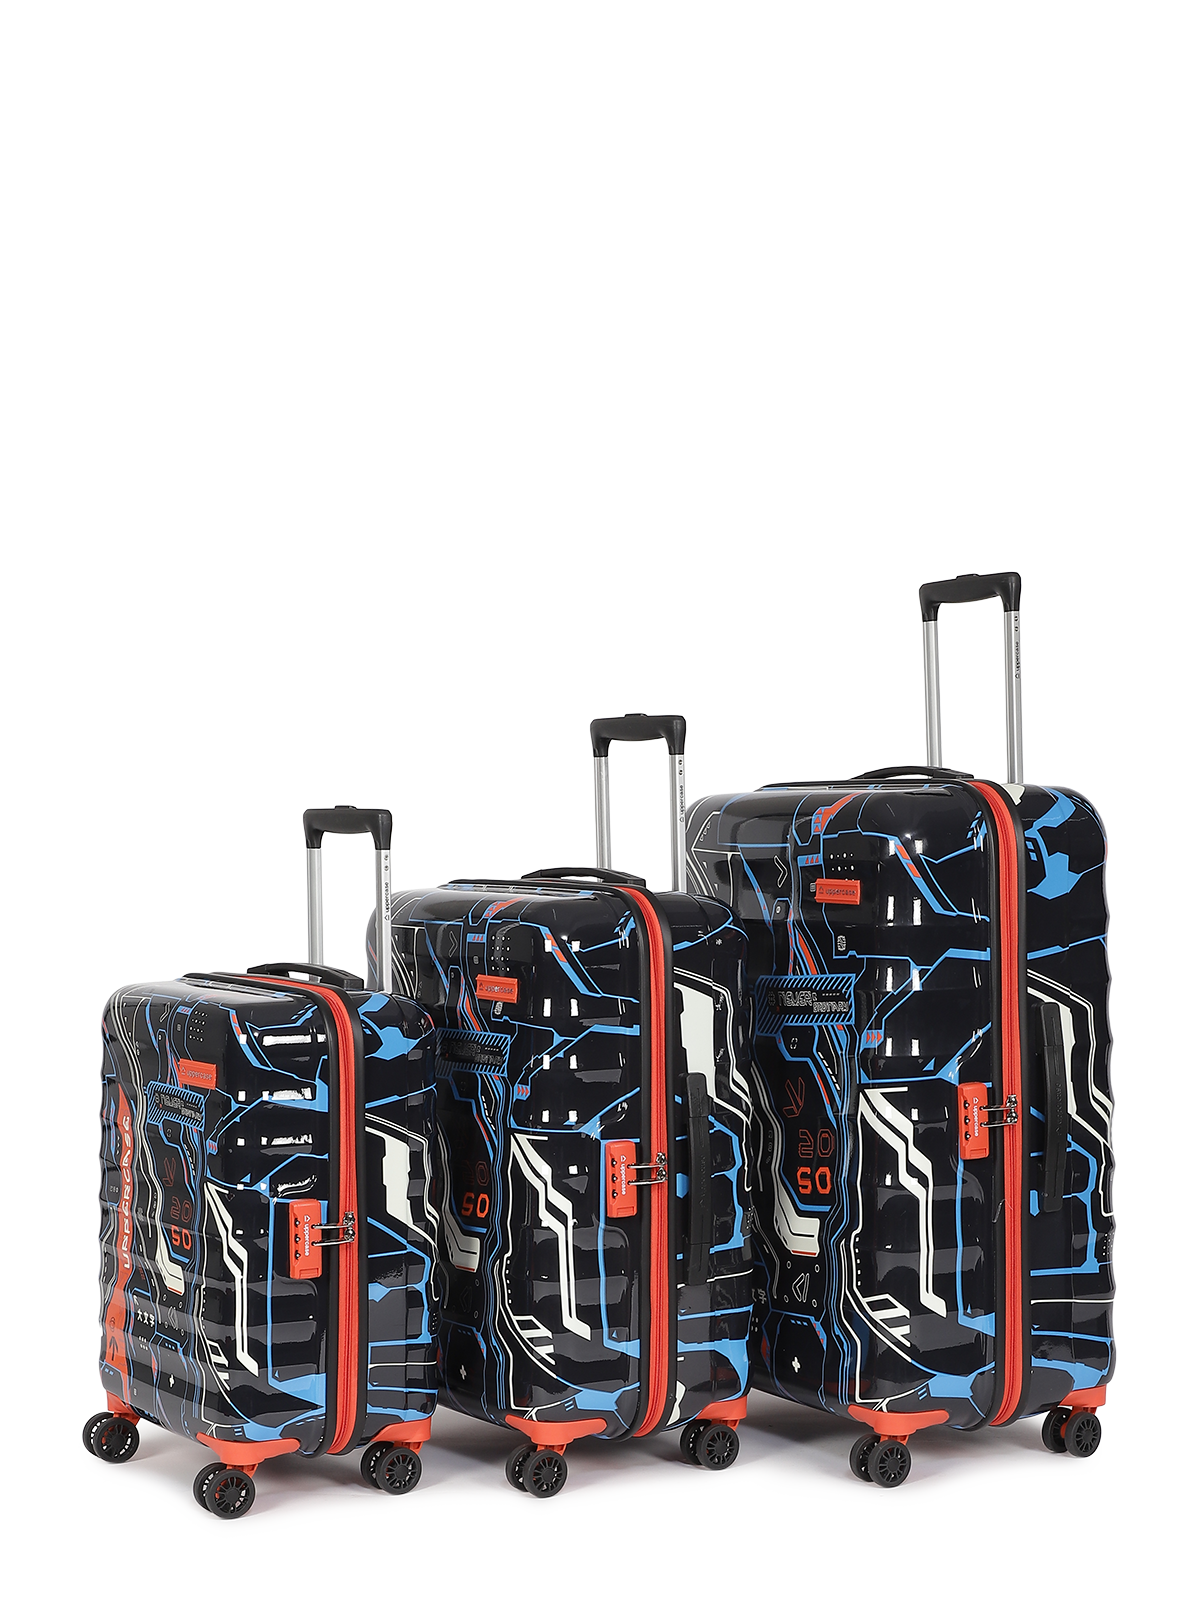 uppercase Cyber Punk Cabin Check in Combination Lock Hard Trolley Set of 3 Black